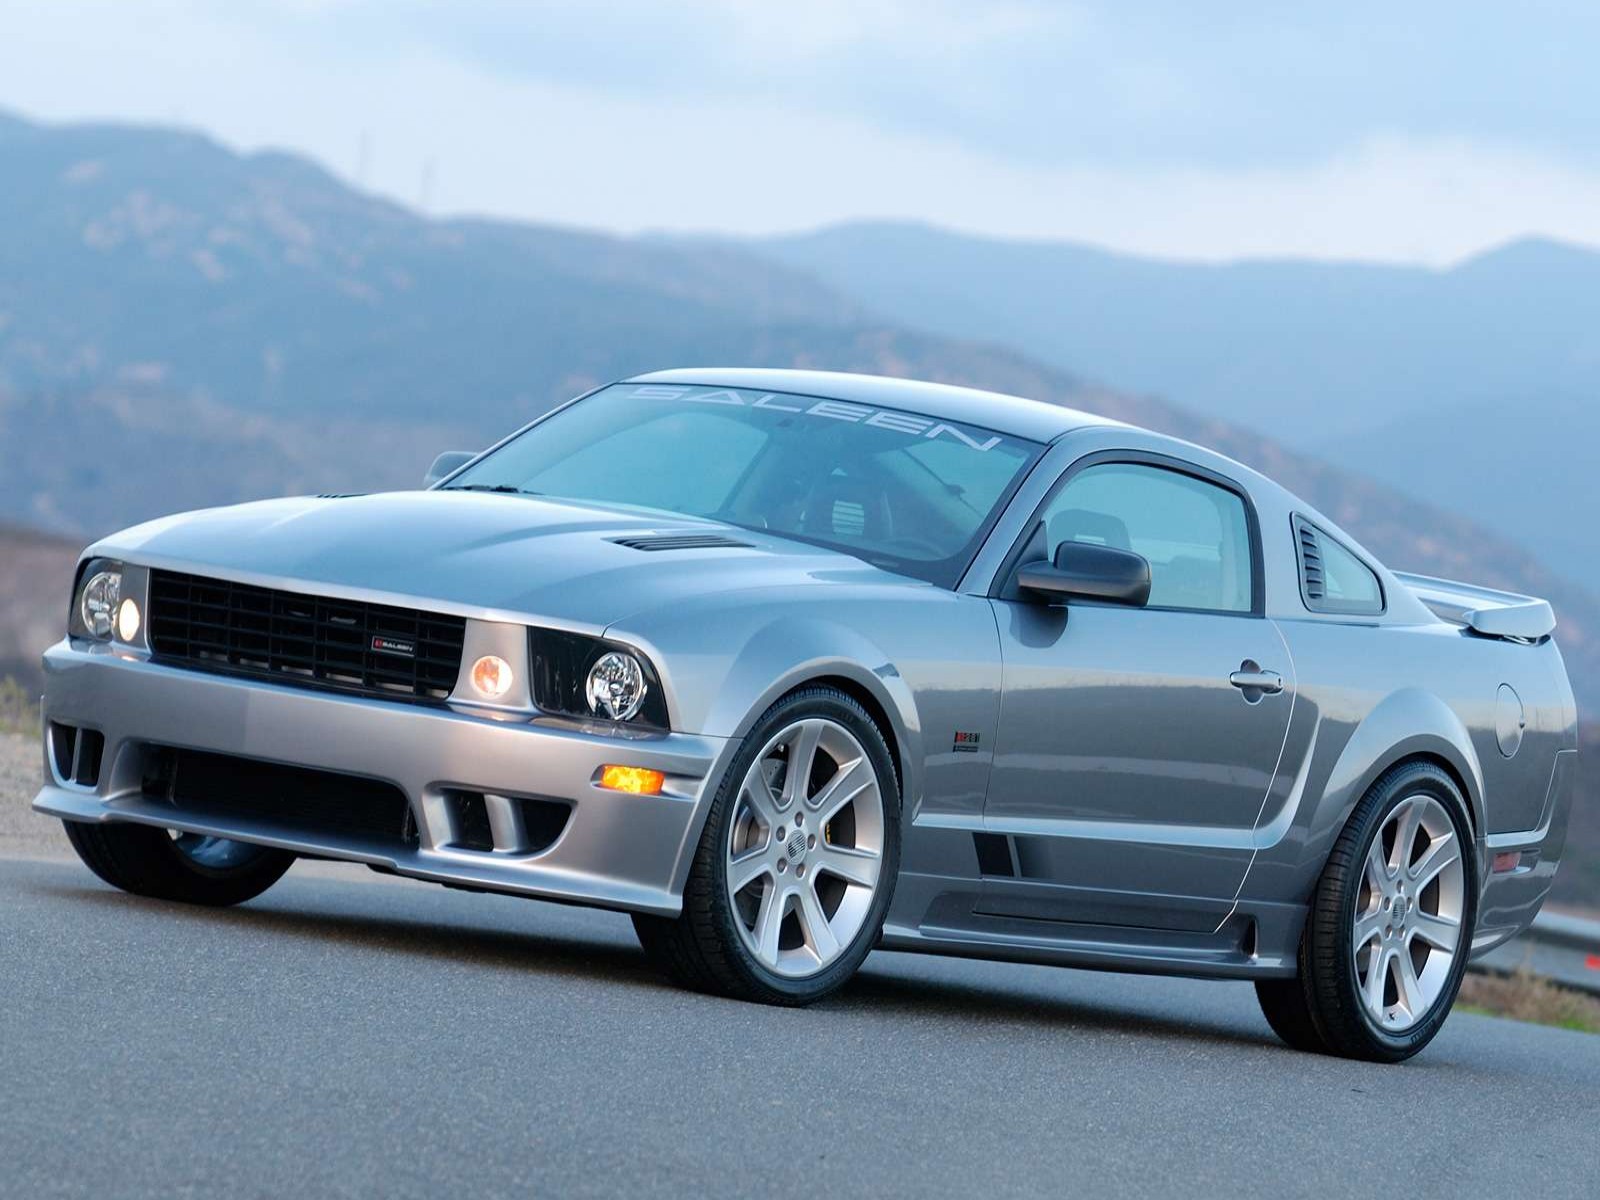 Ford mustang s281 saleen